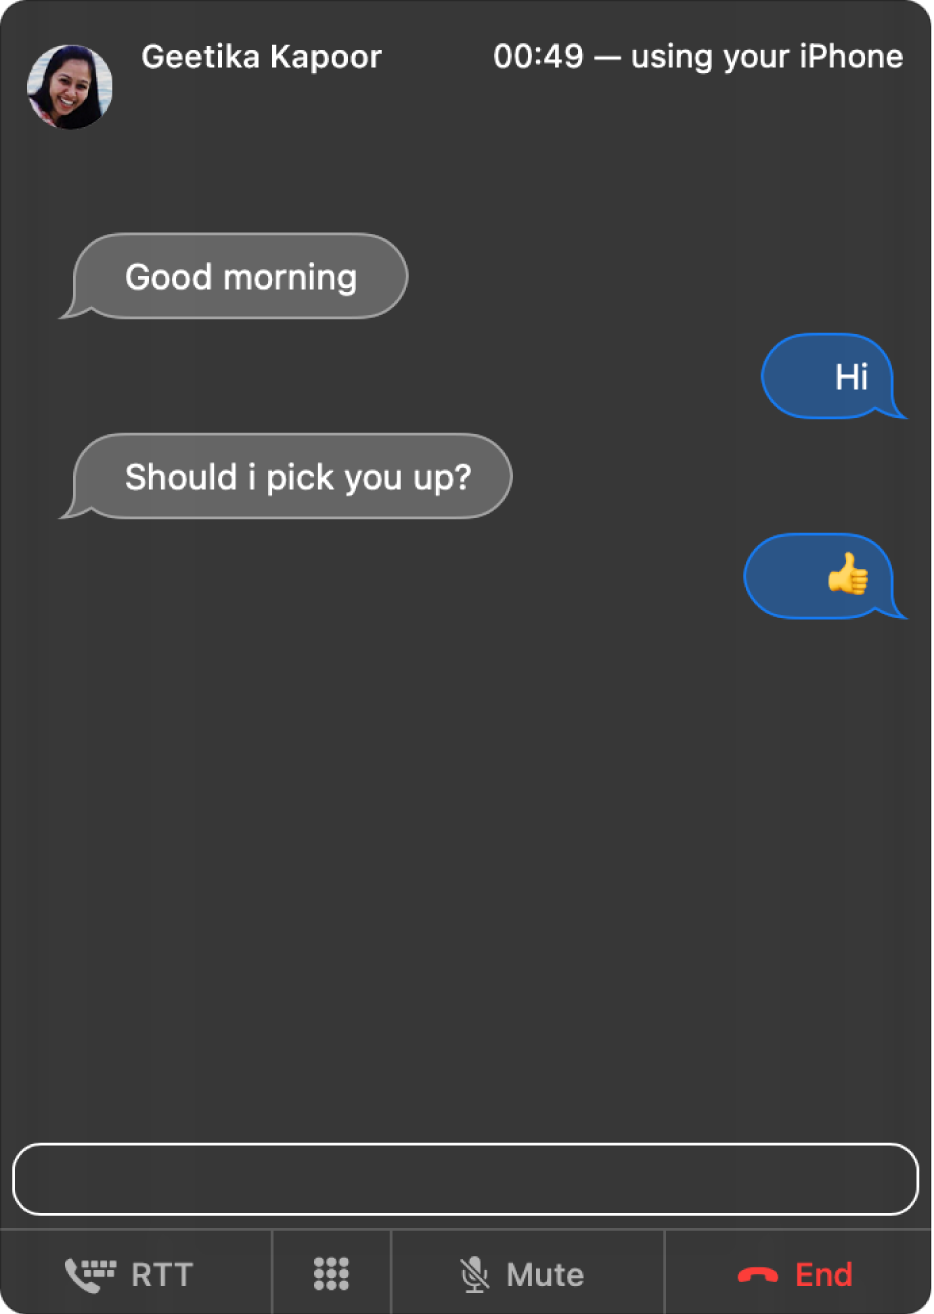 An RTT window with a conversation between two people.